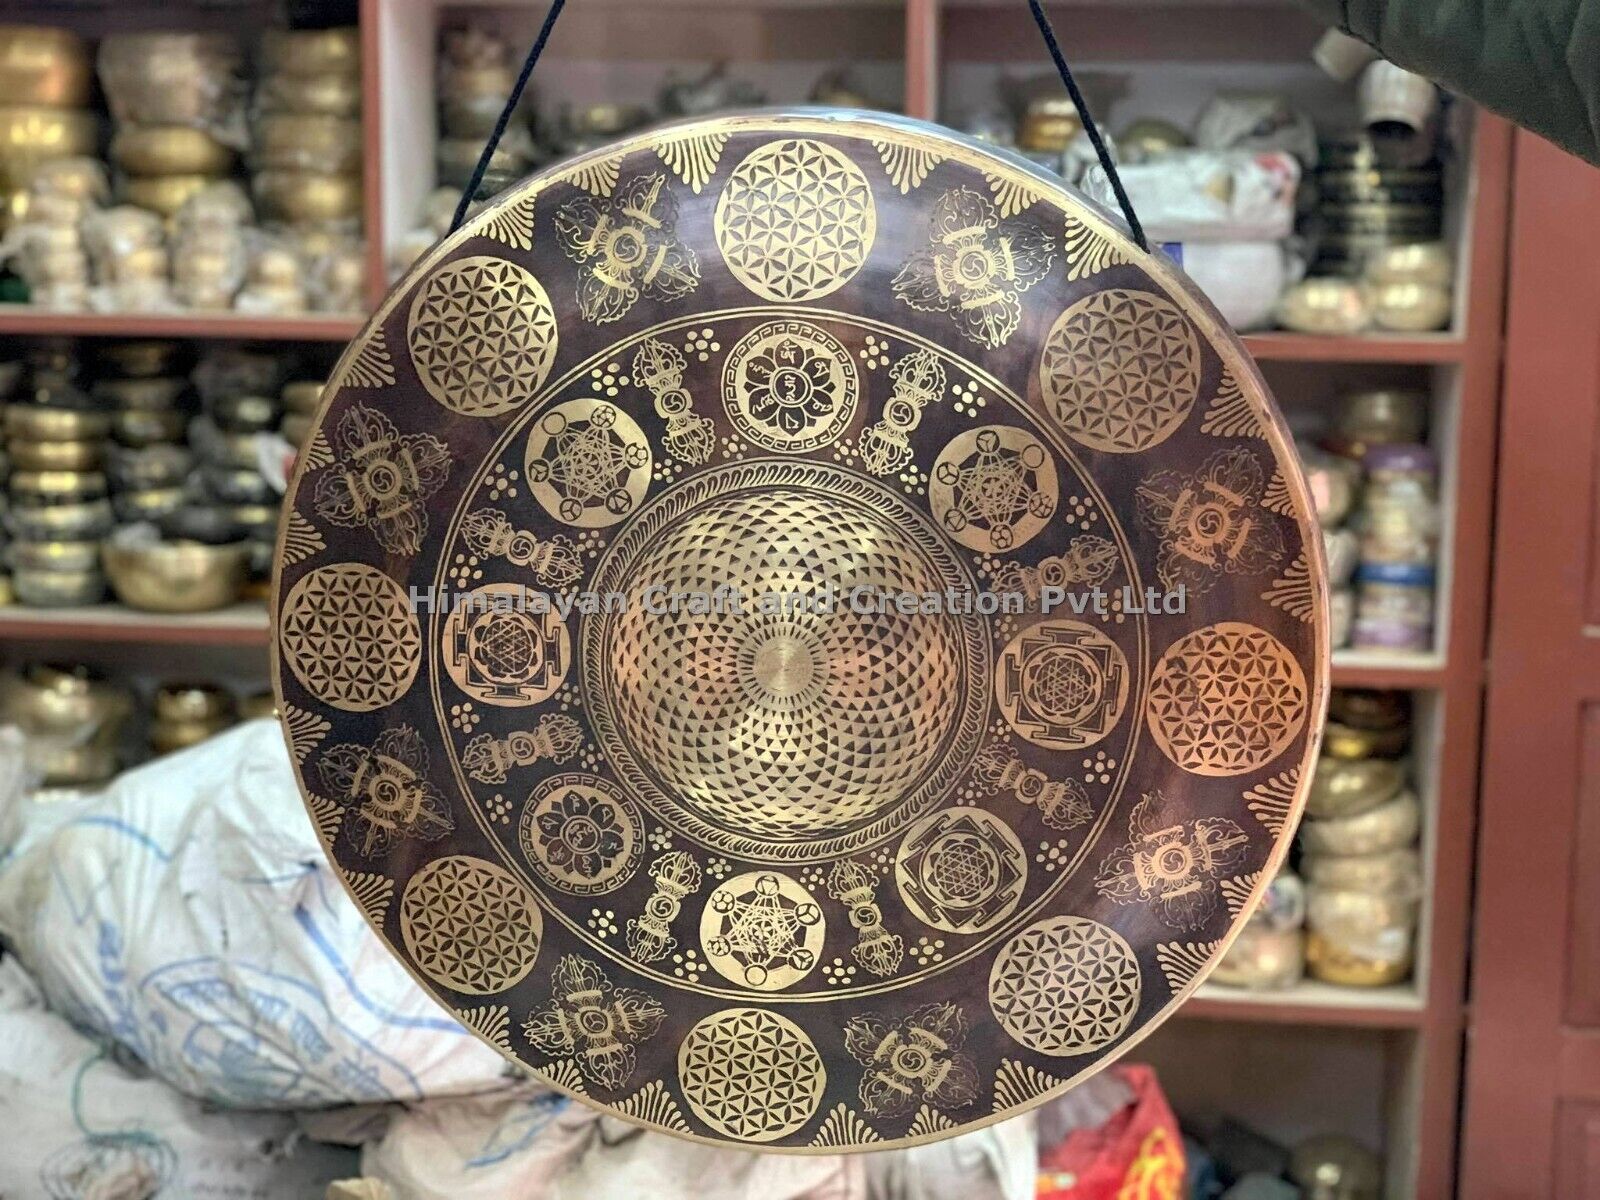 22 inches Flower of life gongs - Deep resonance sound baths gongs from Nepal 